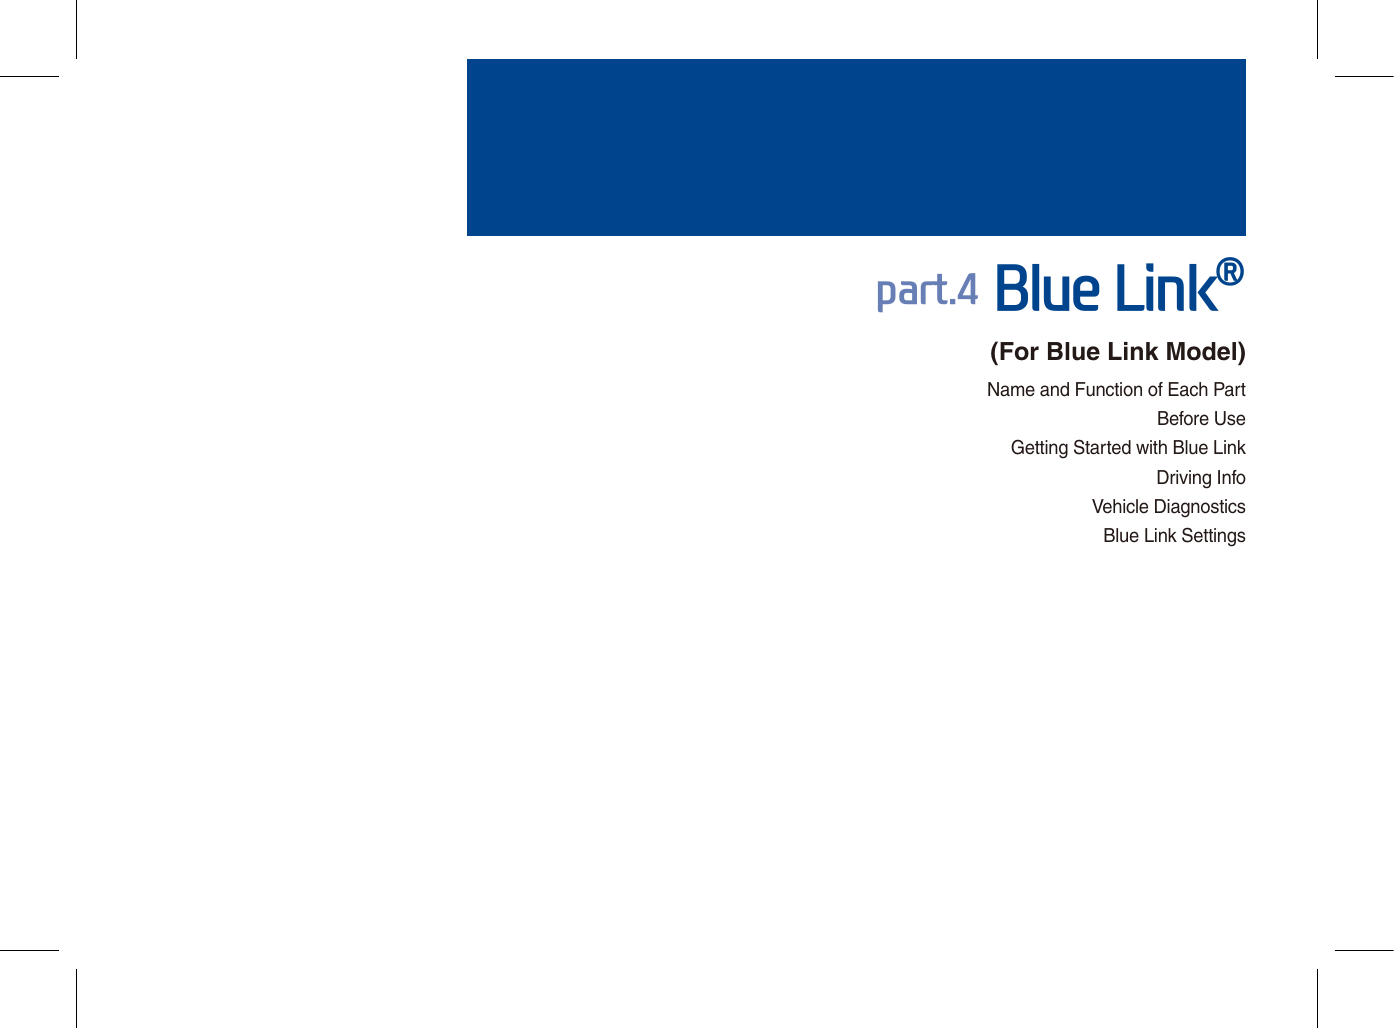 Name and Function of Each PartBefore UseGetting Started with Blue LinkDriving InfoVehicle DiagnosticsBlue Link Settingspart.4 Blue Link®(For Blue Link Model)